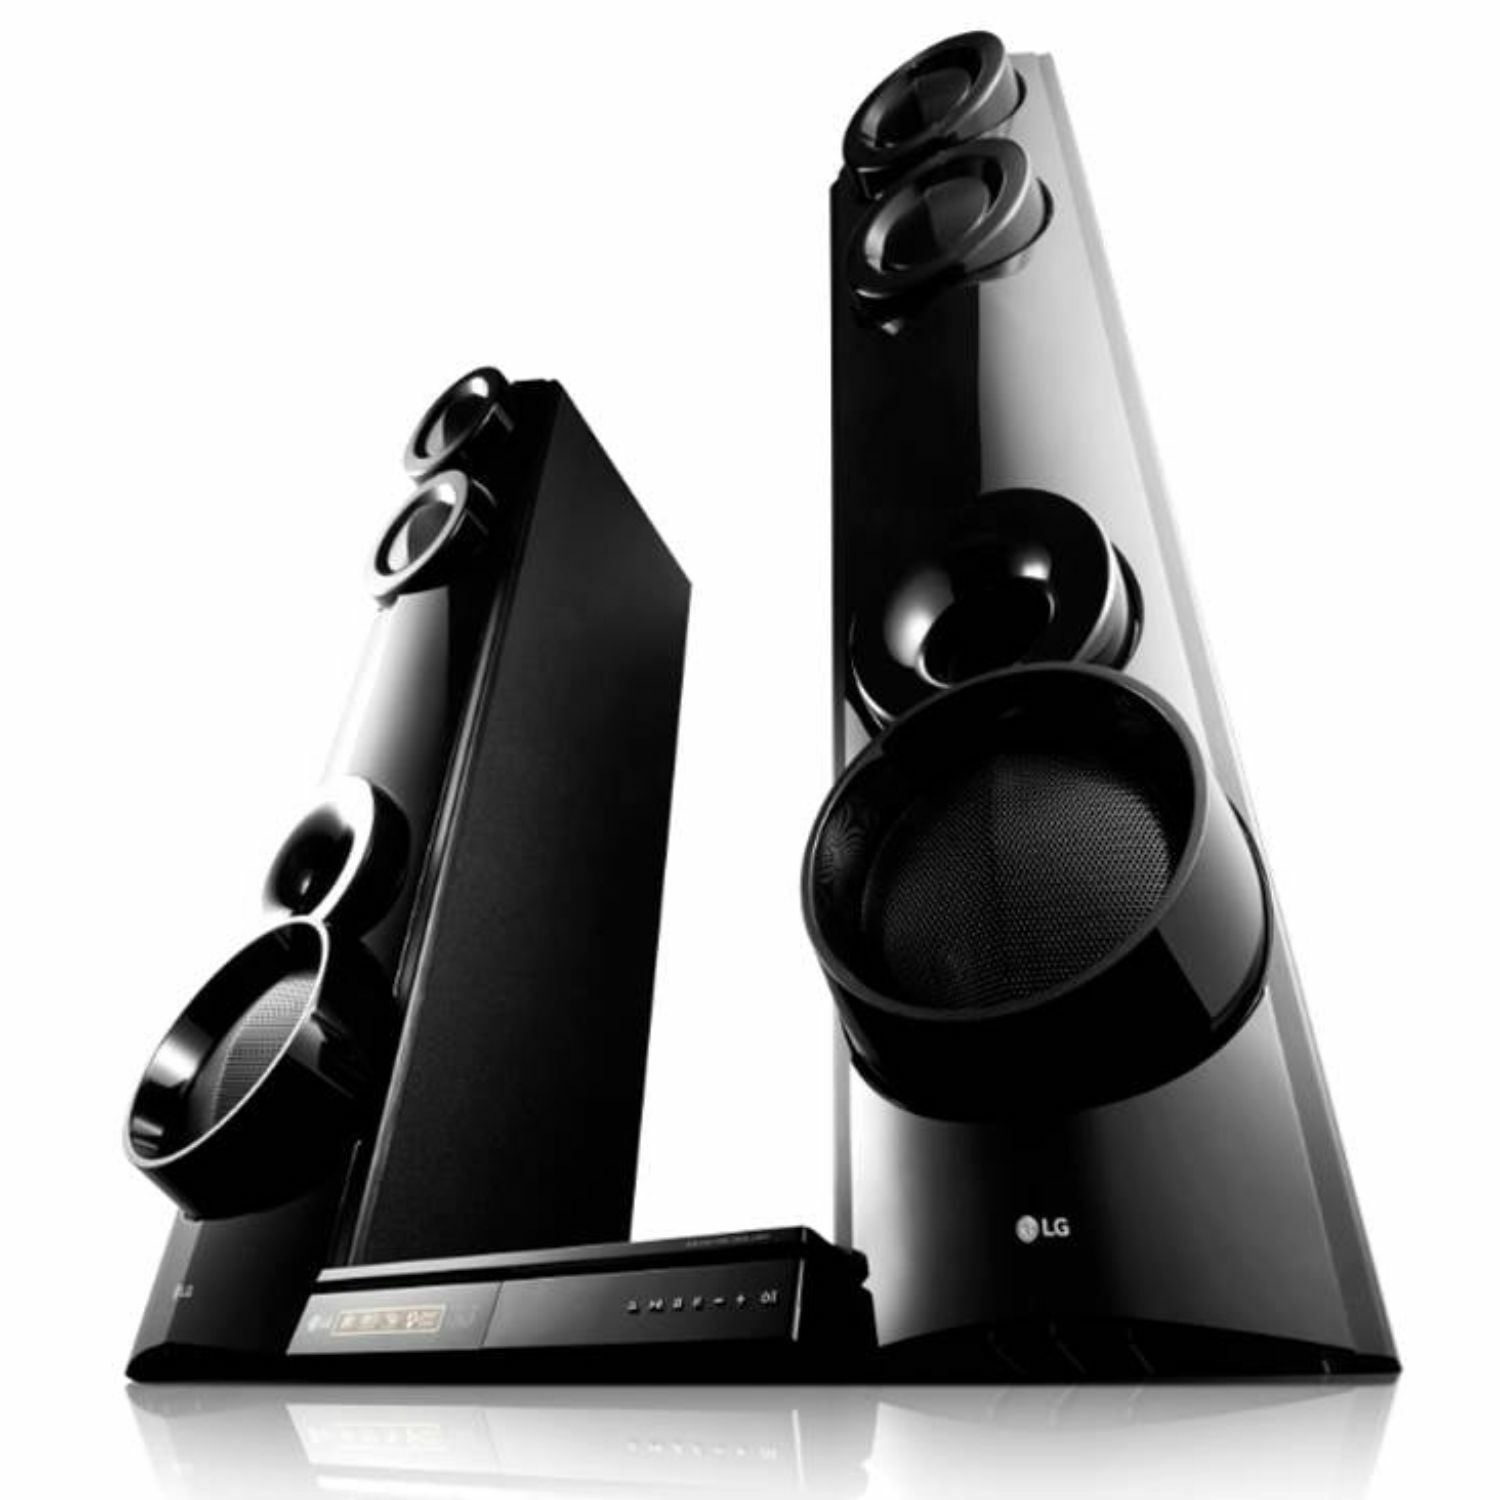 LG 3D-Capable 1000W 4.2ch Blu-ray Disc Home Theater System - Black - image 1 of 5